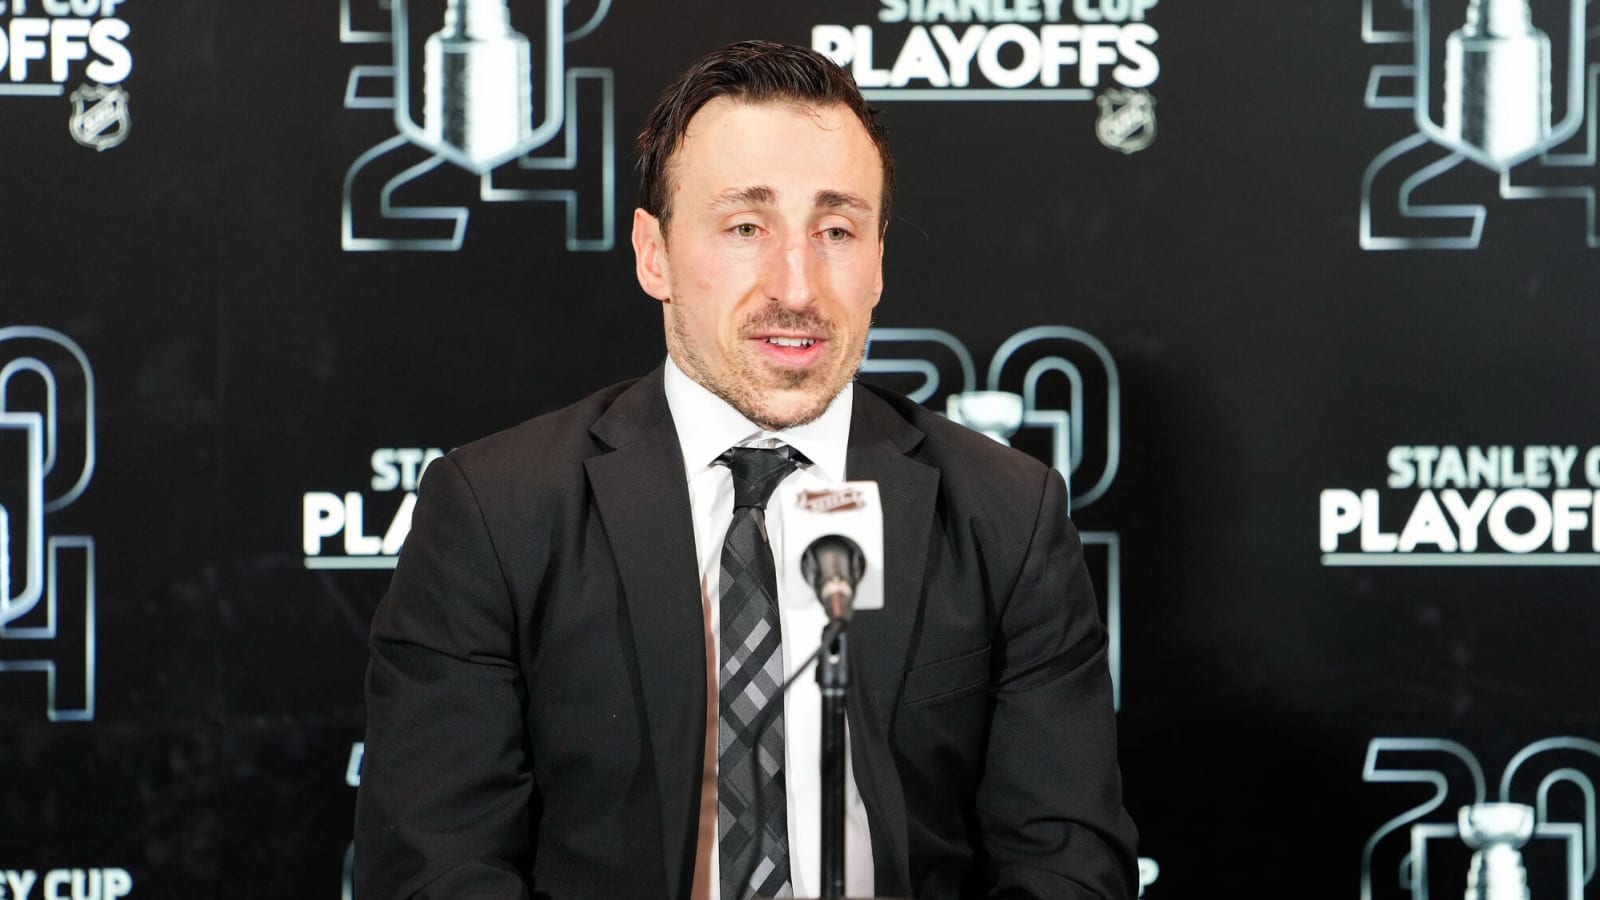 Game 6: Marchand Likely Back for Bruins; Lomberg, Cousins for Panthers